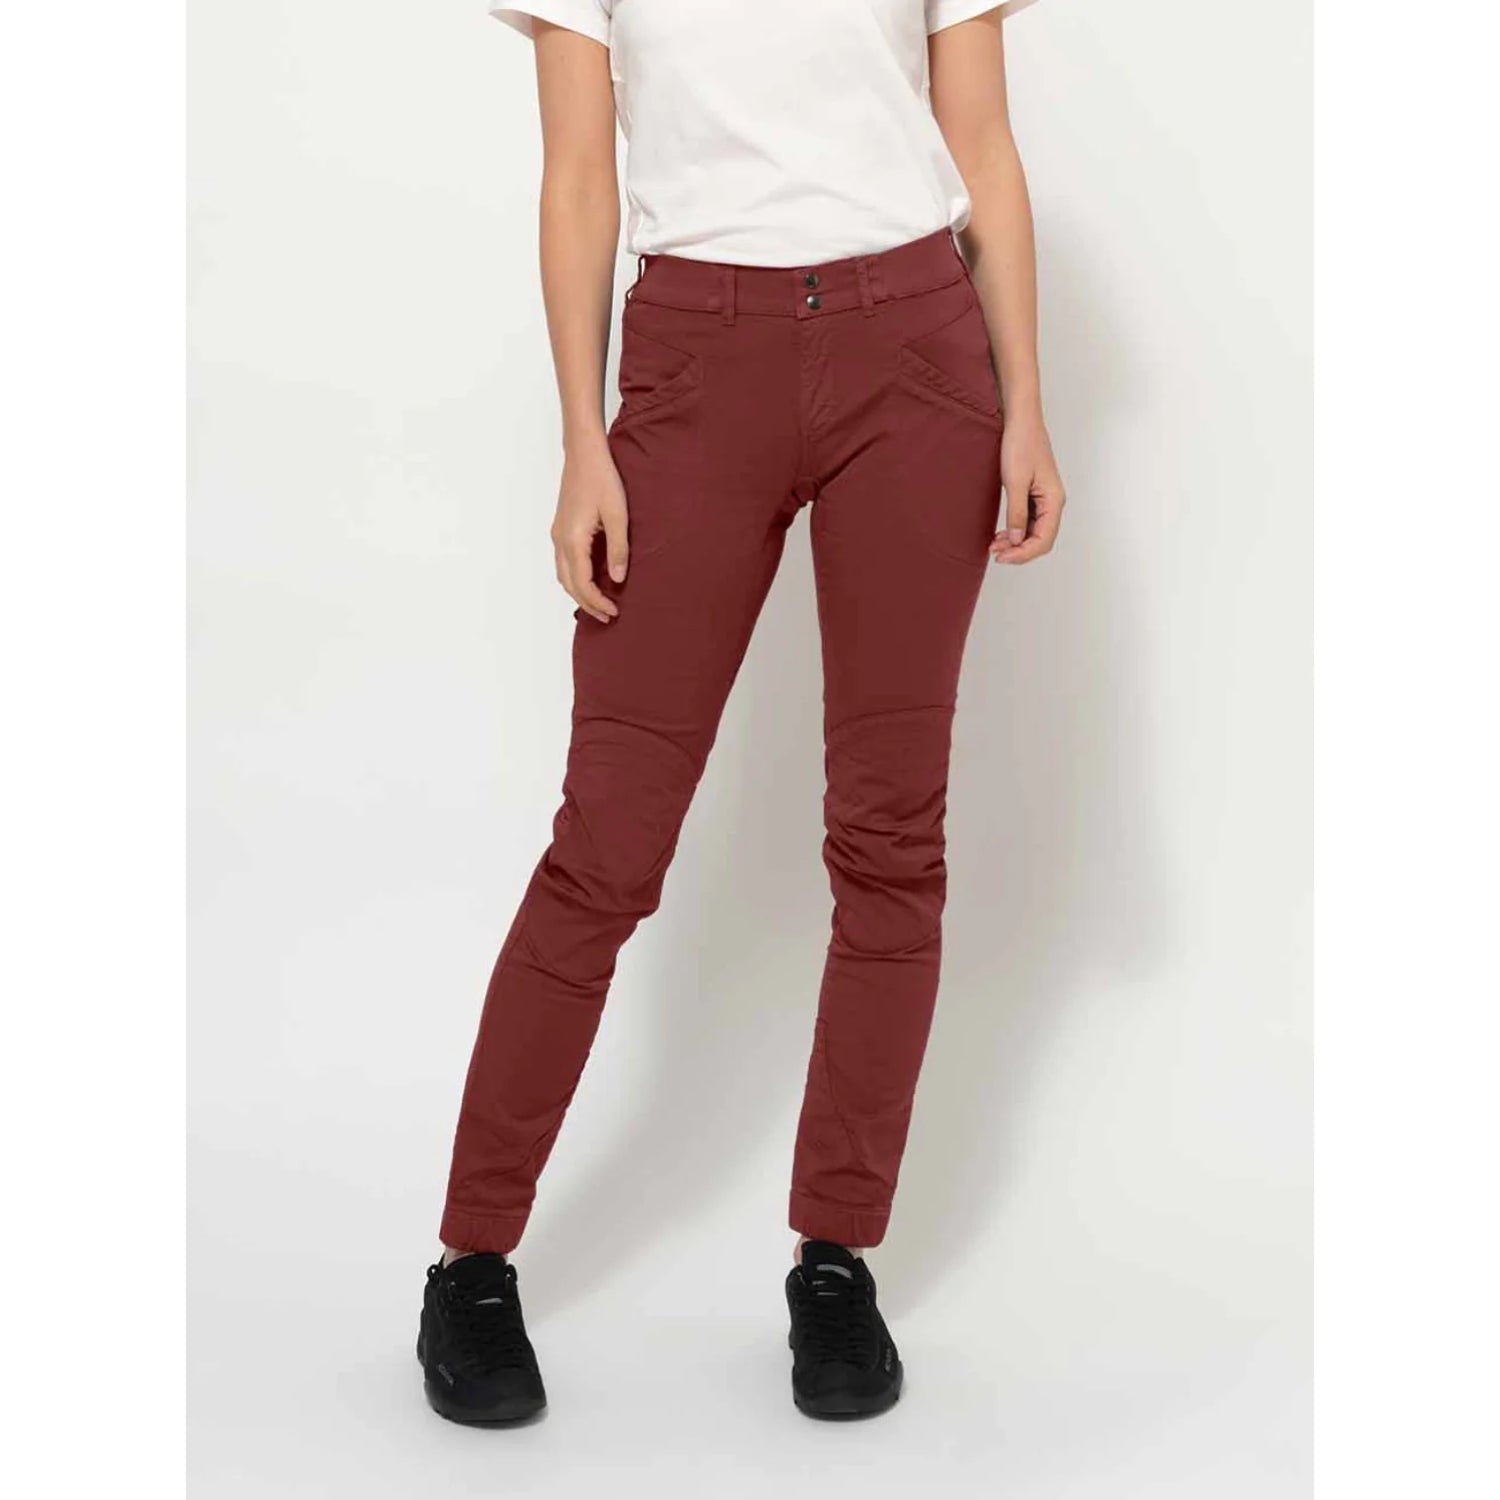 Looking For Wild Laila Peak Pant - Womens (Madder Brown)